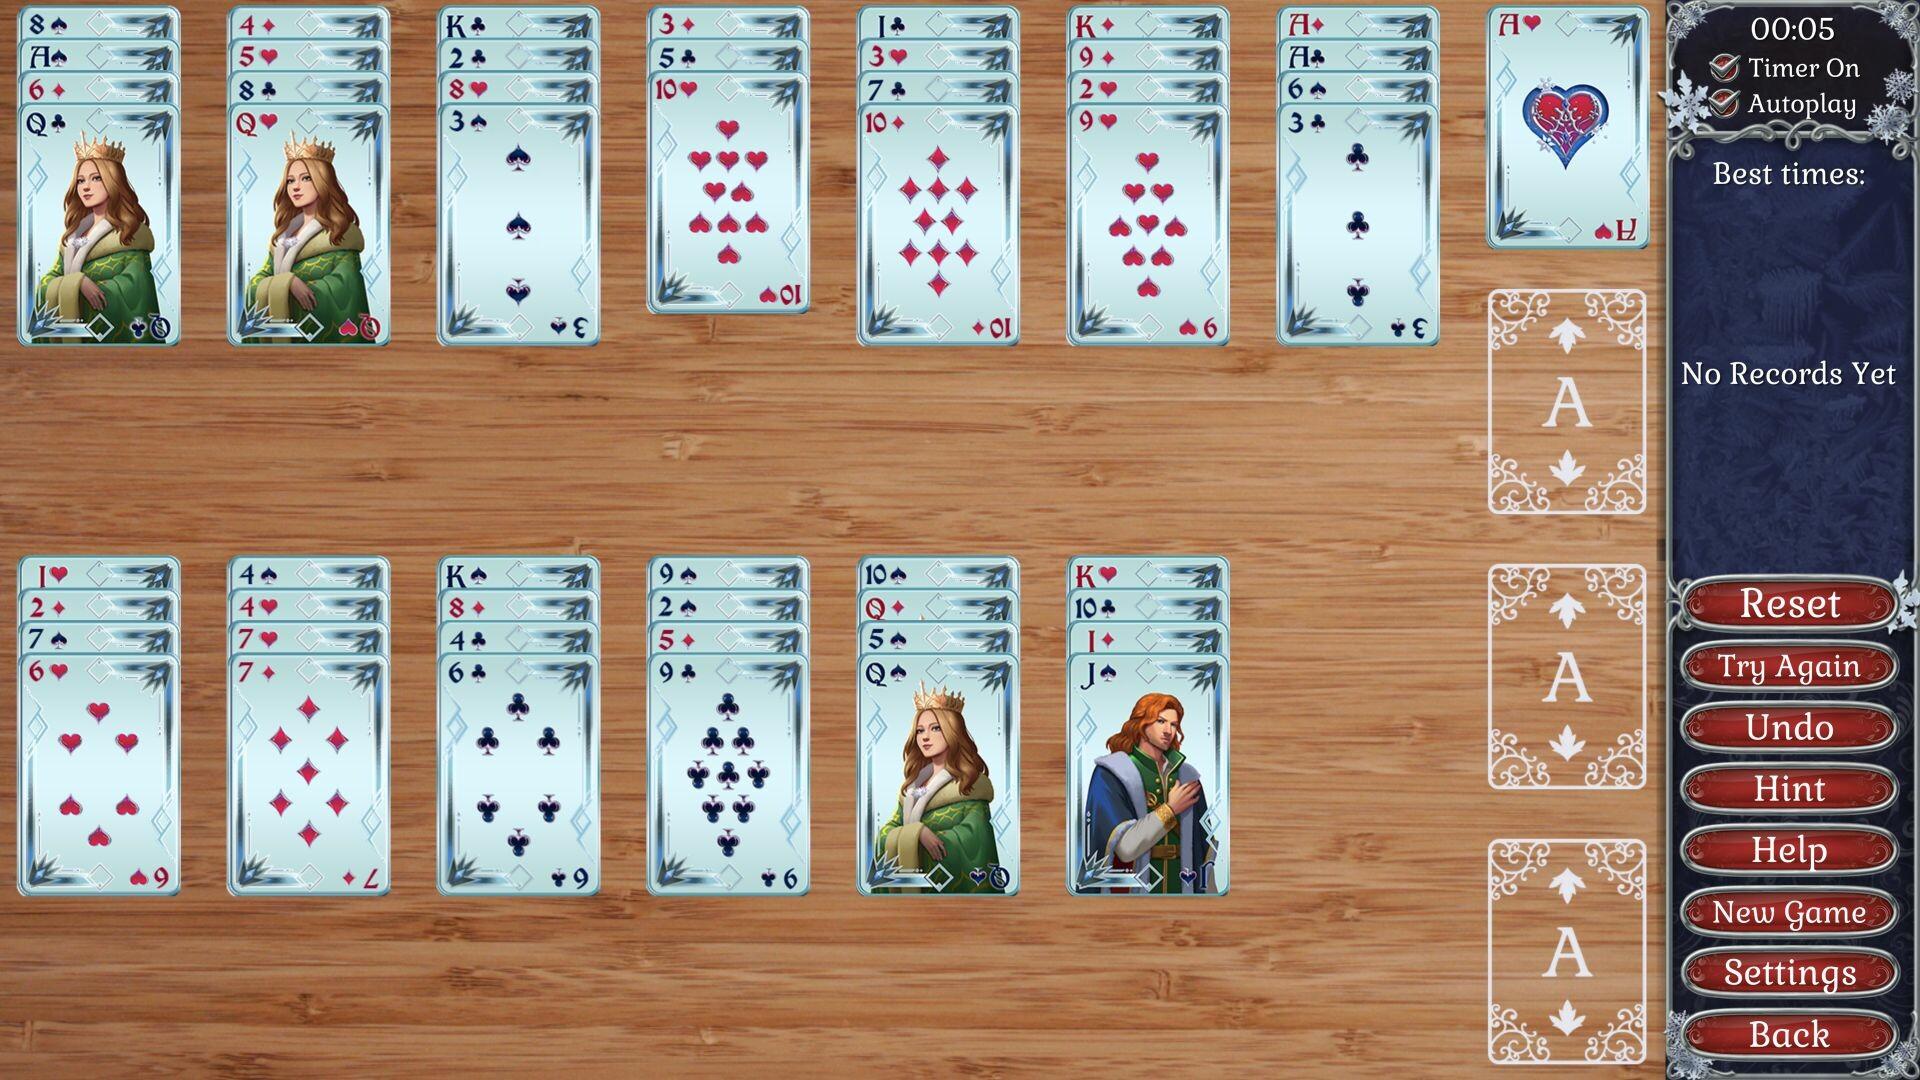 Jewel Match Solitaire Winterscapes 2 - Collector's Edition ภาพหน้าจอเกม